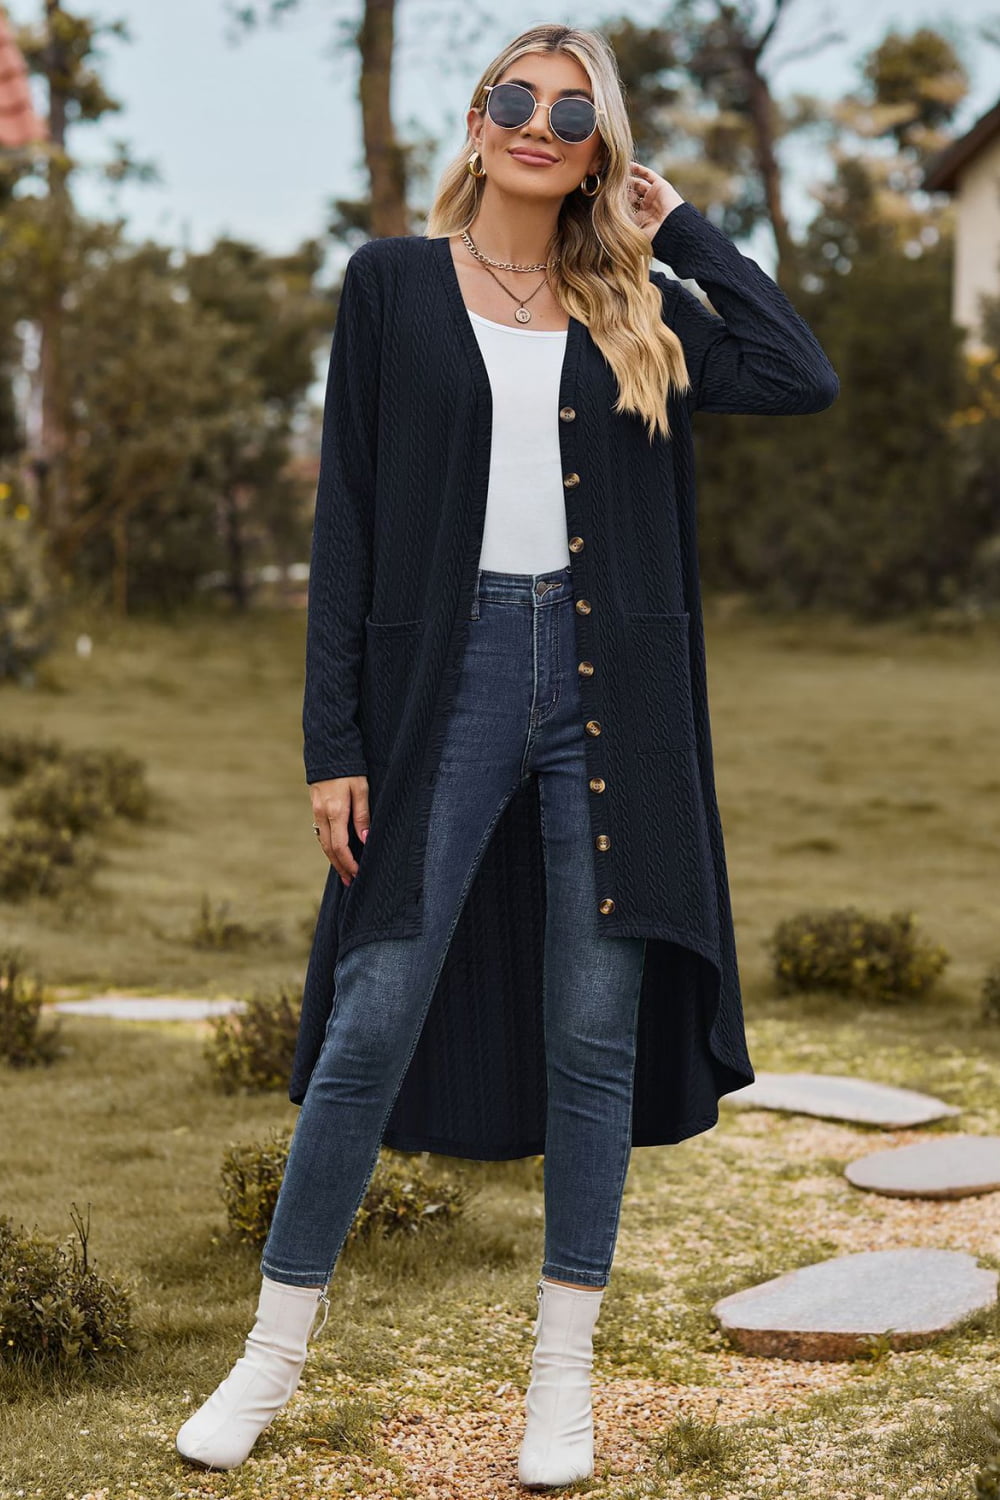 V-Neck Long Sleeve Cardigan with Pocket - Women’s Clothing & Accessories - Shirts & Tops - 16 - 2024